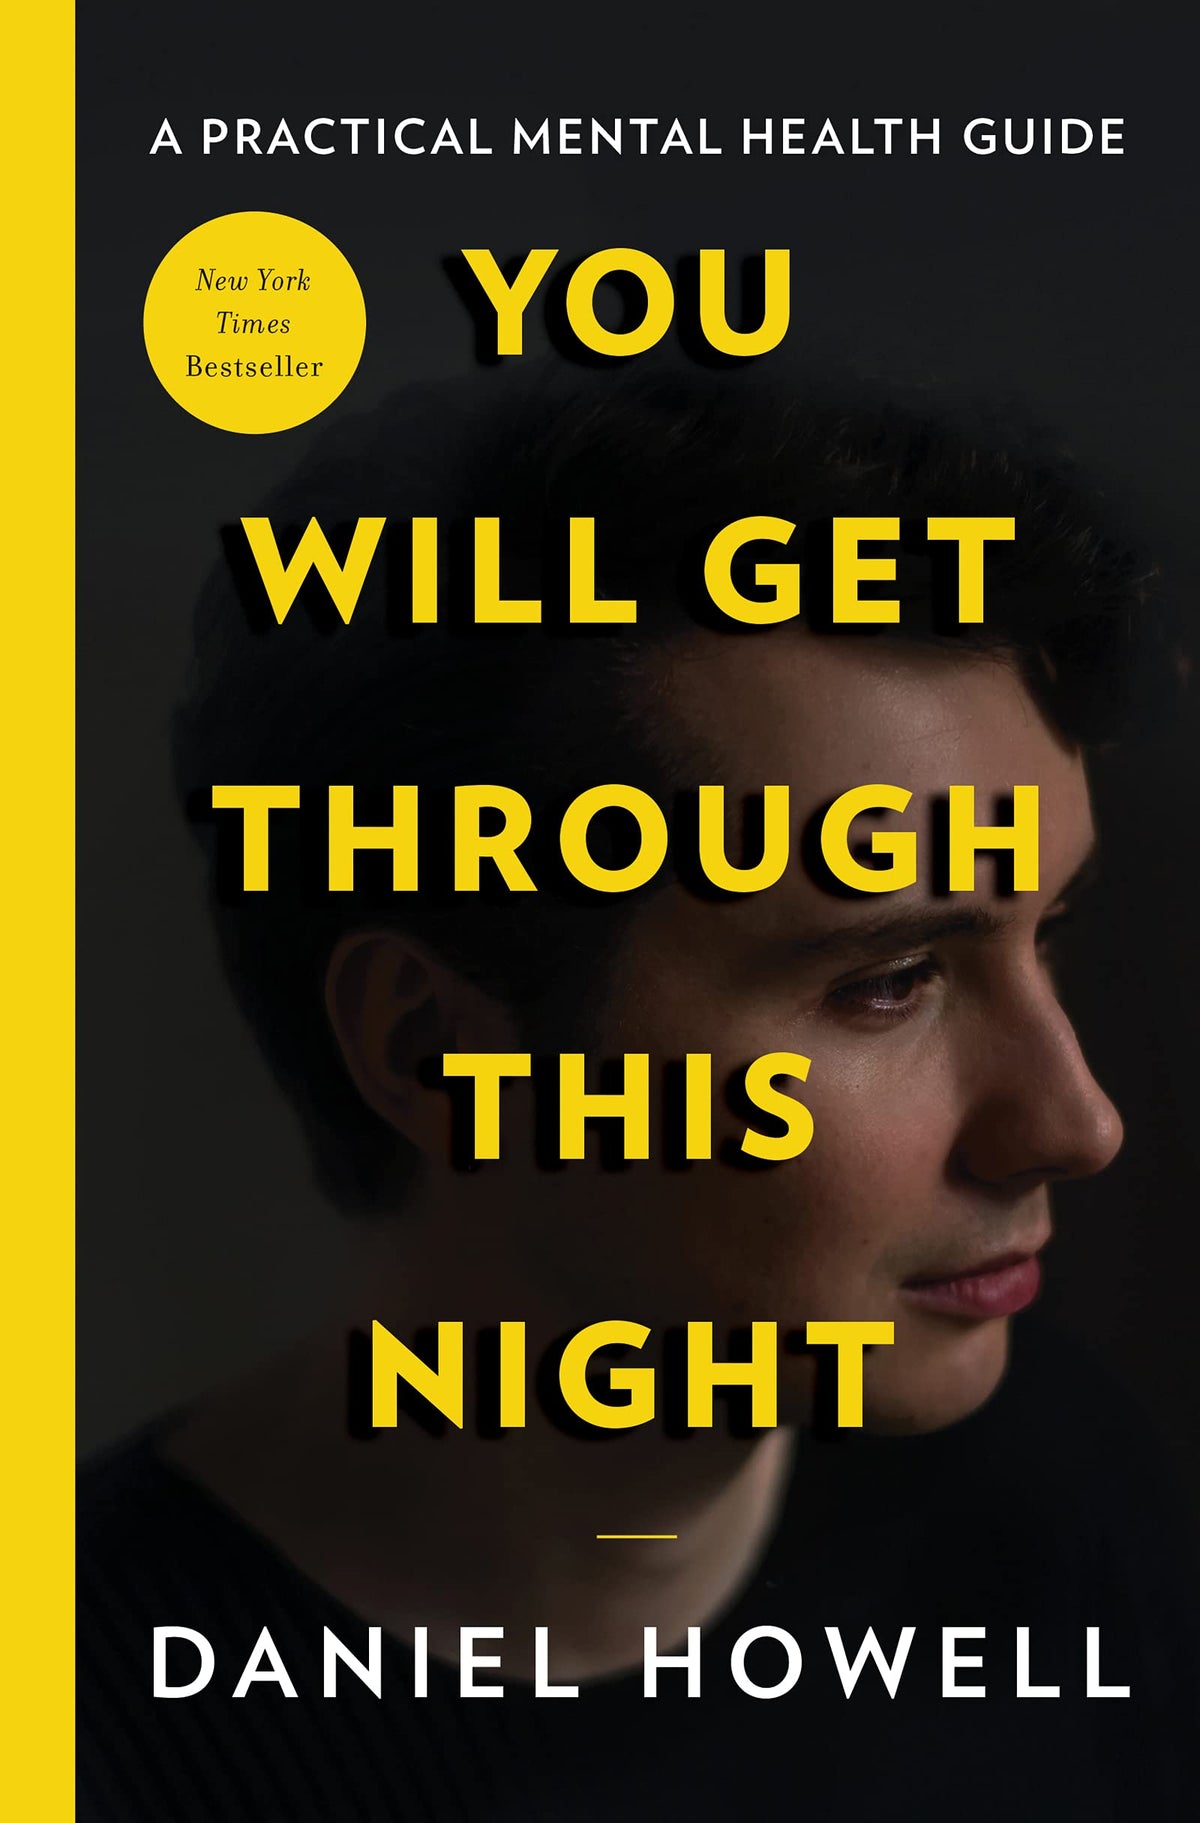 self help books, books for mental health, mental health books, self help mental health, self therapy books, helpful books for teens, books for mental illness, you will get through this night, daniel howell